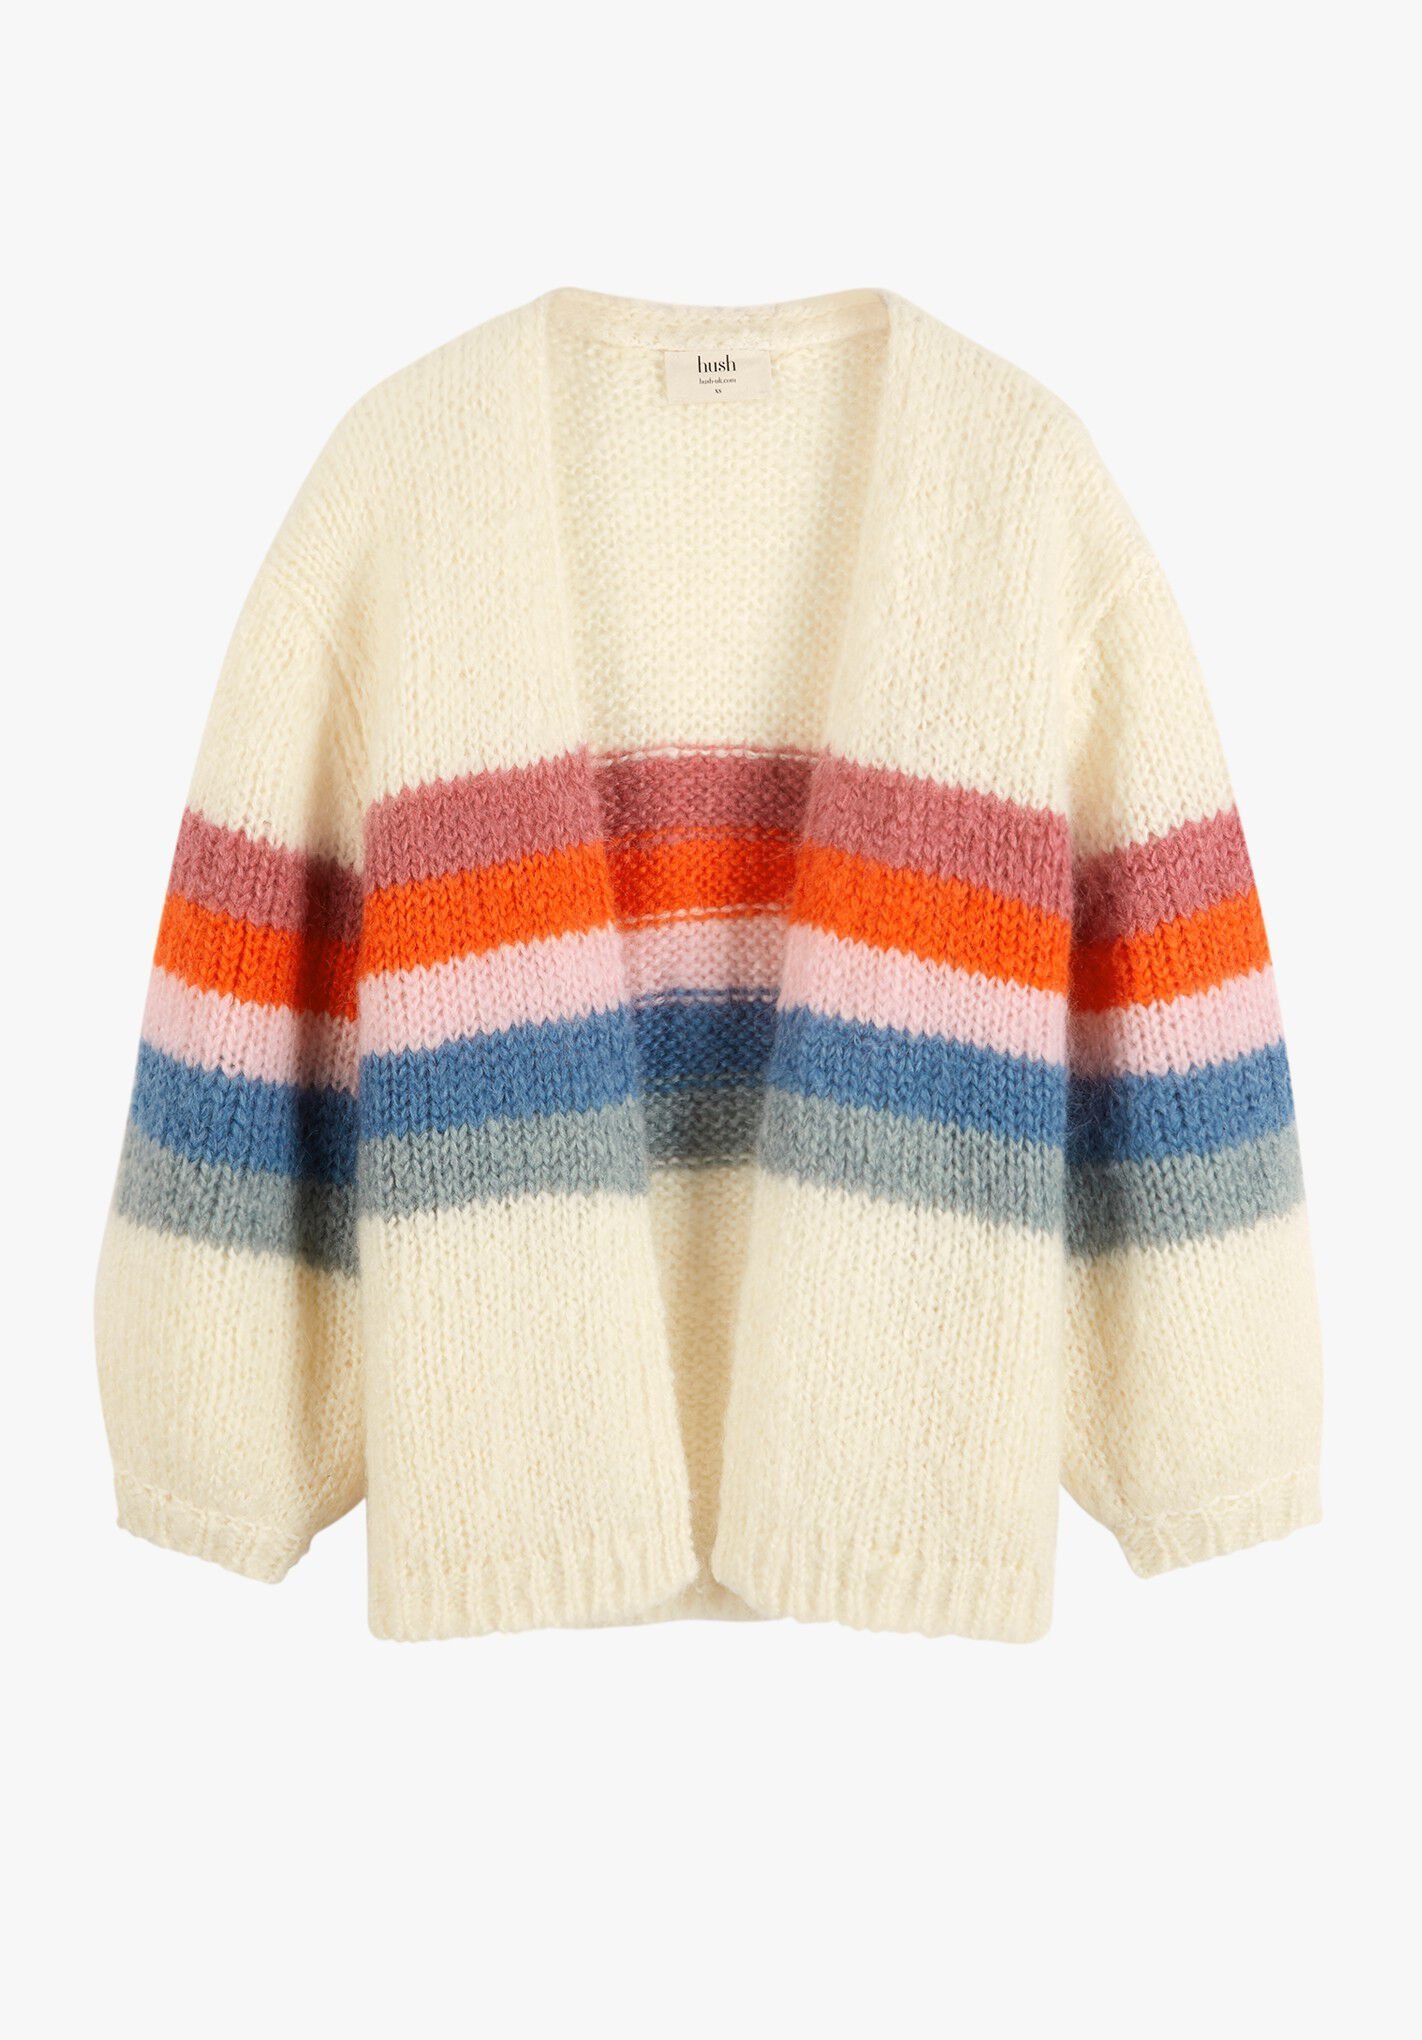 HUSH Rainbow Chunky Knit Cardigan in Off White/Multi | Endource